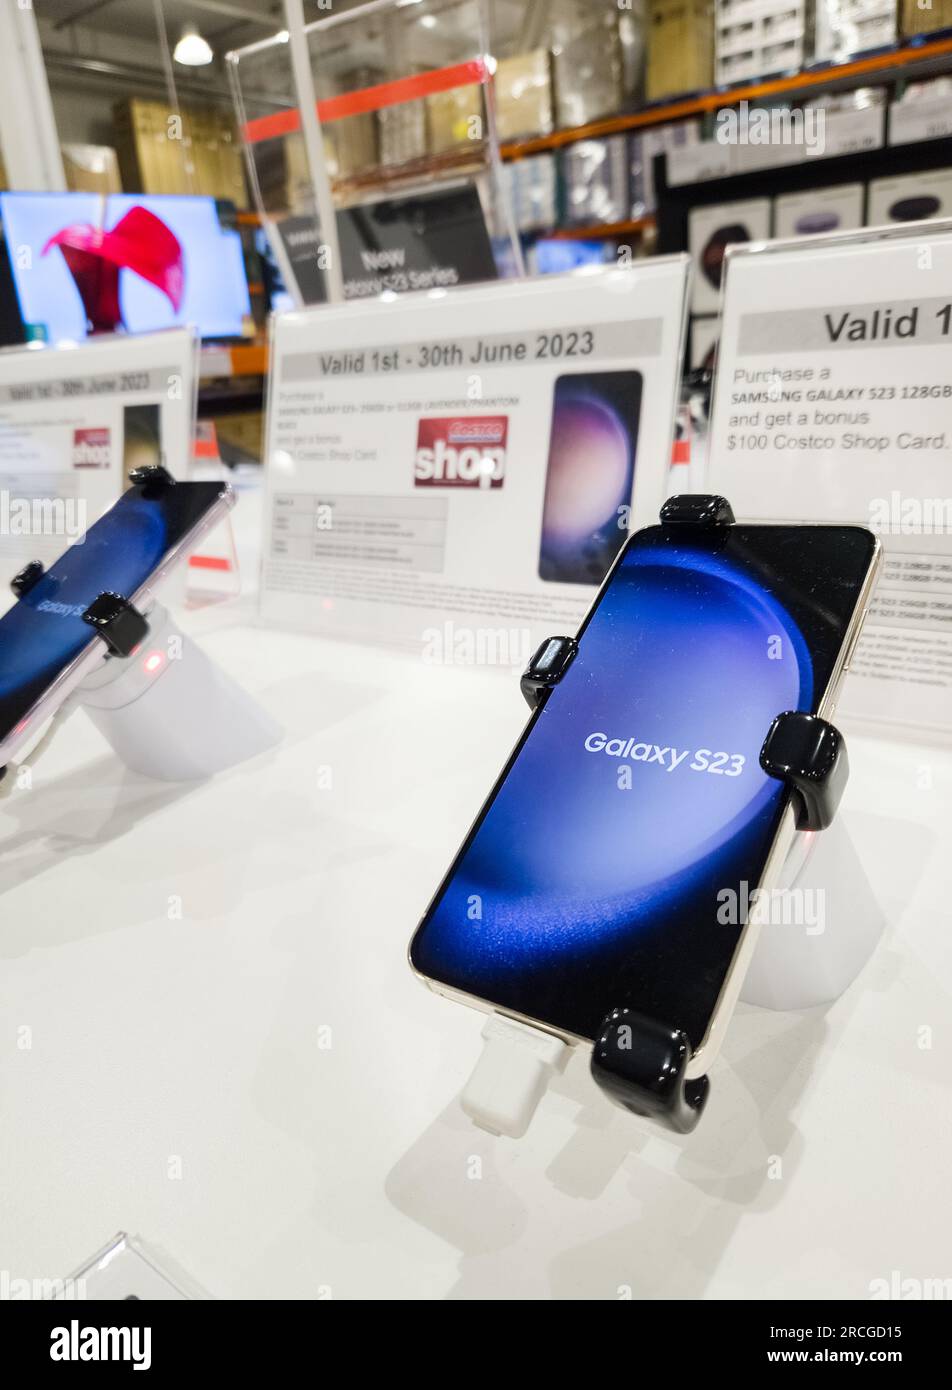 Auckland, New Zealand - June 30, 2023: Samsung Galaxy S23 Android smartphone on display for sale at Costco. Stock Photo